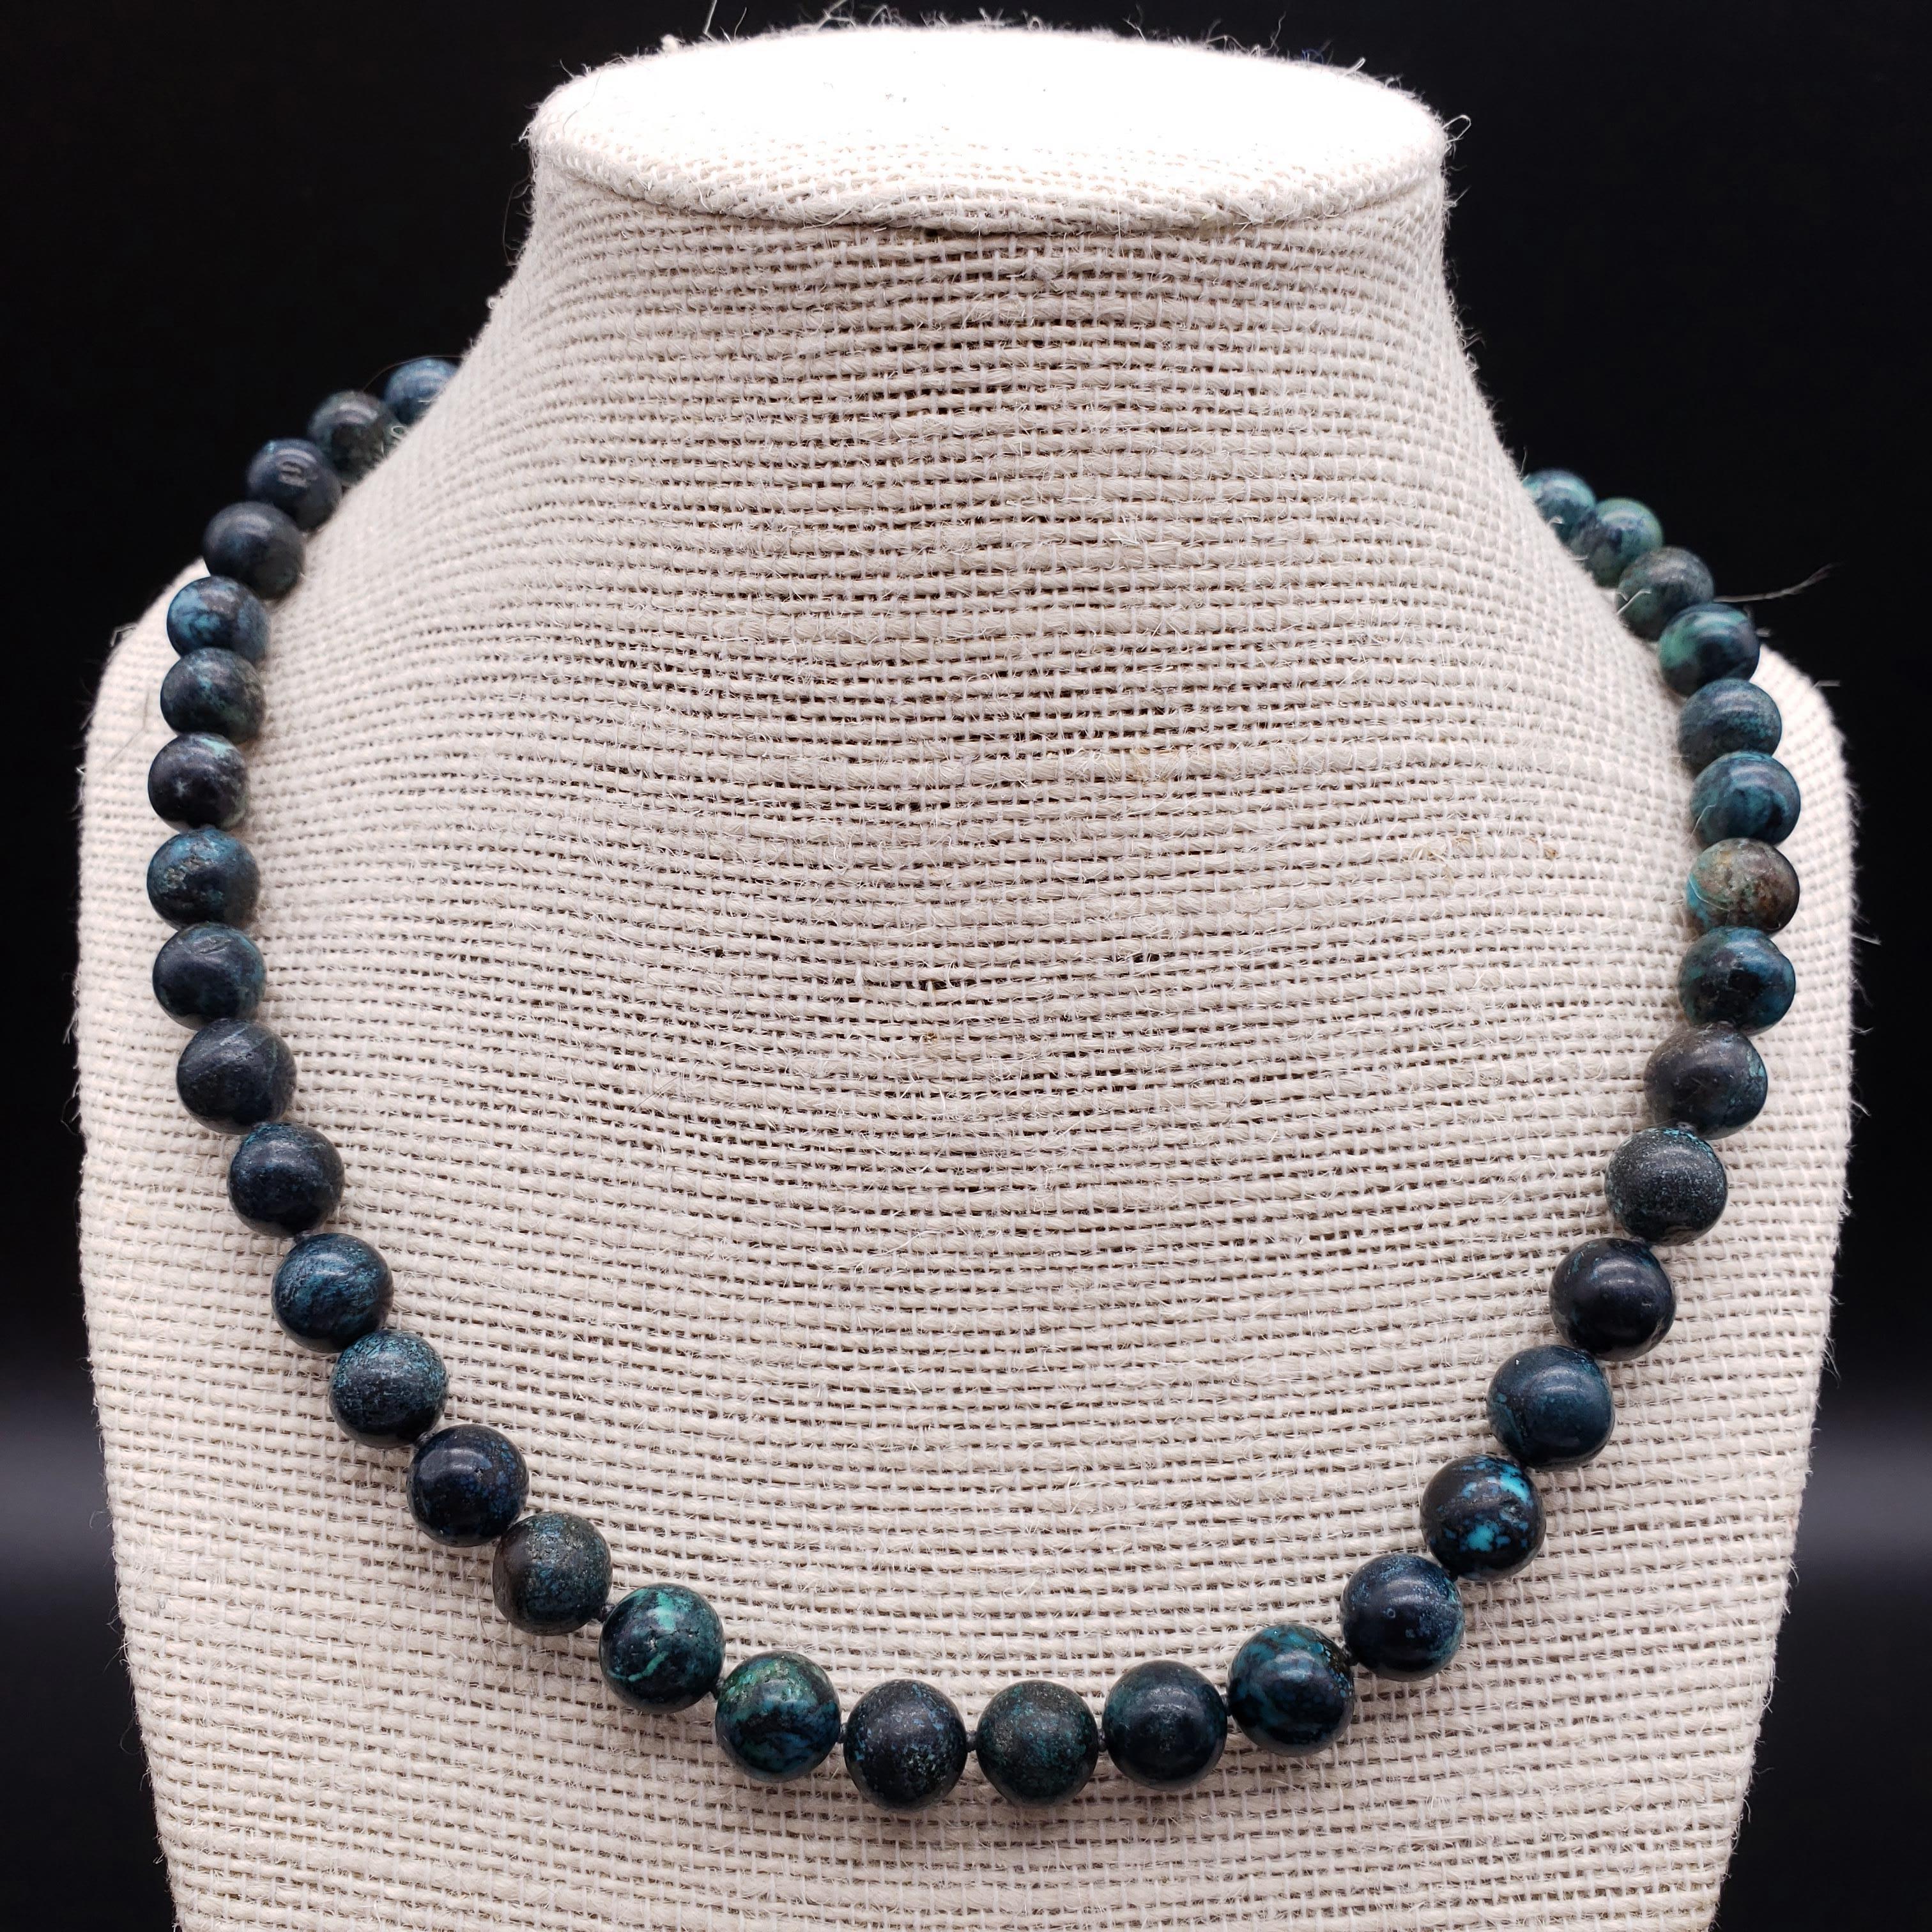 An exquisite vintage turquoise bead necklace. This 18-inch, knotted string necklace features a series of round, 10mm, turquoise beads with exotic-looking matrix patterns. The polished gemstones are a rich, unique, and vibrant color. Fastened with a